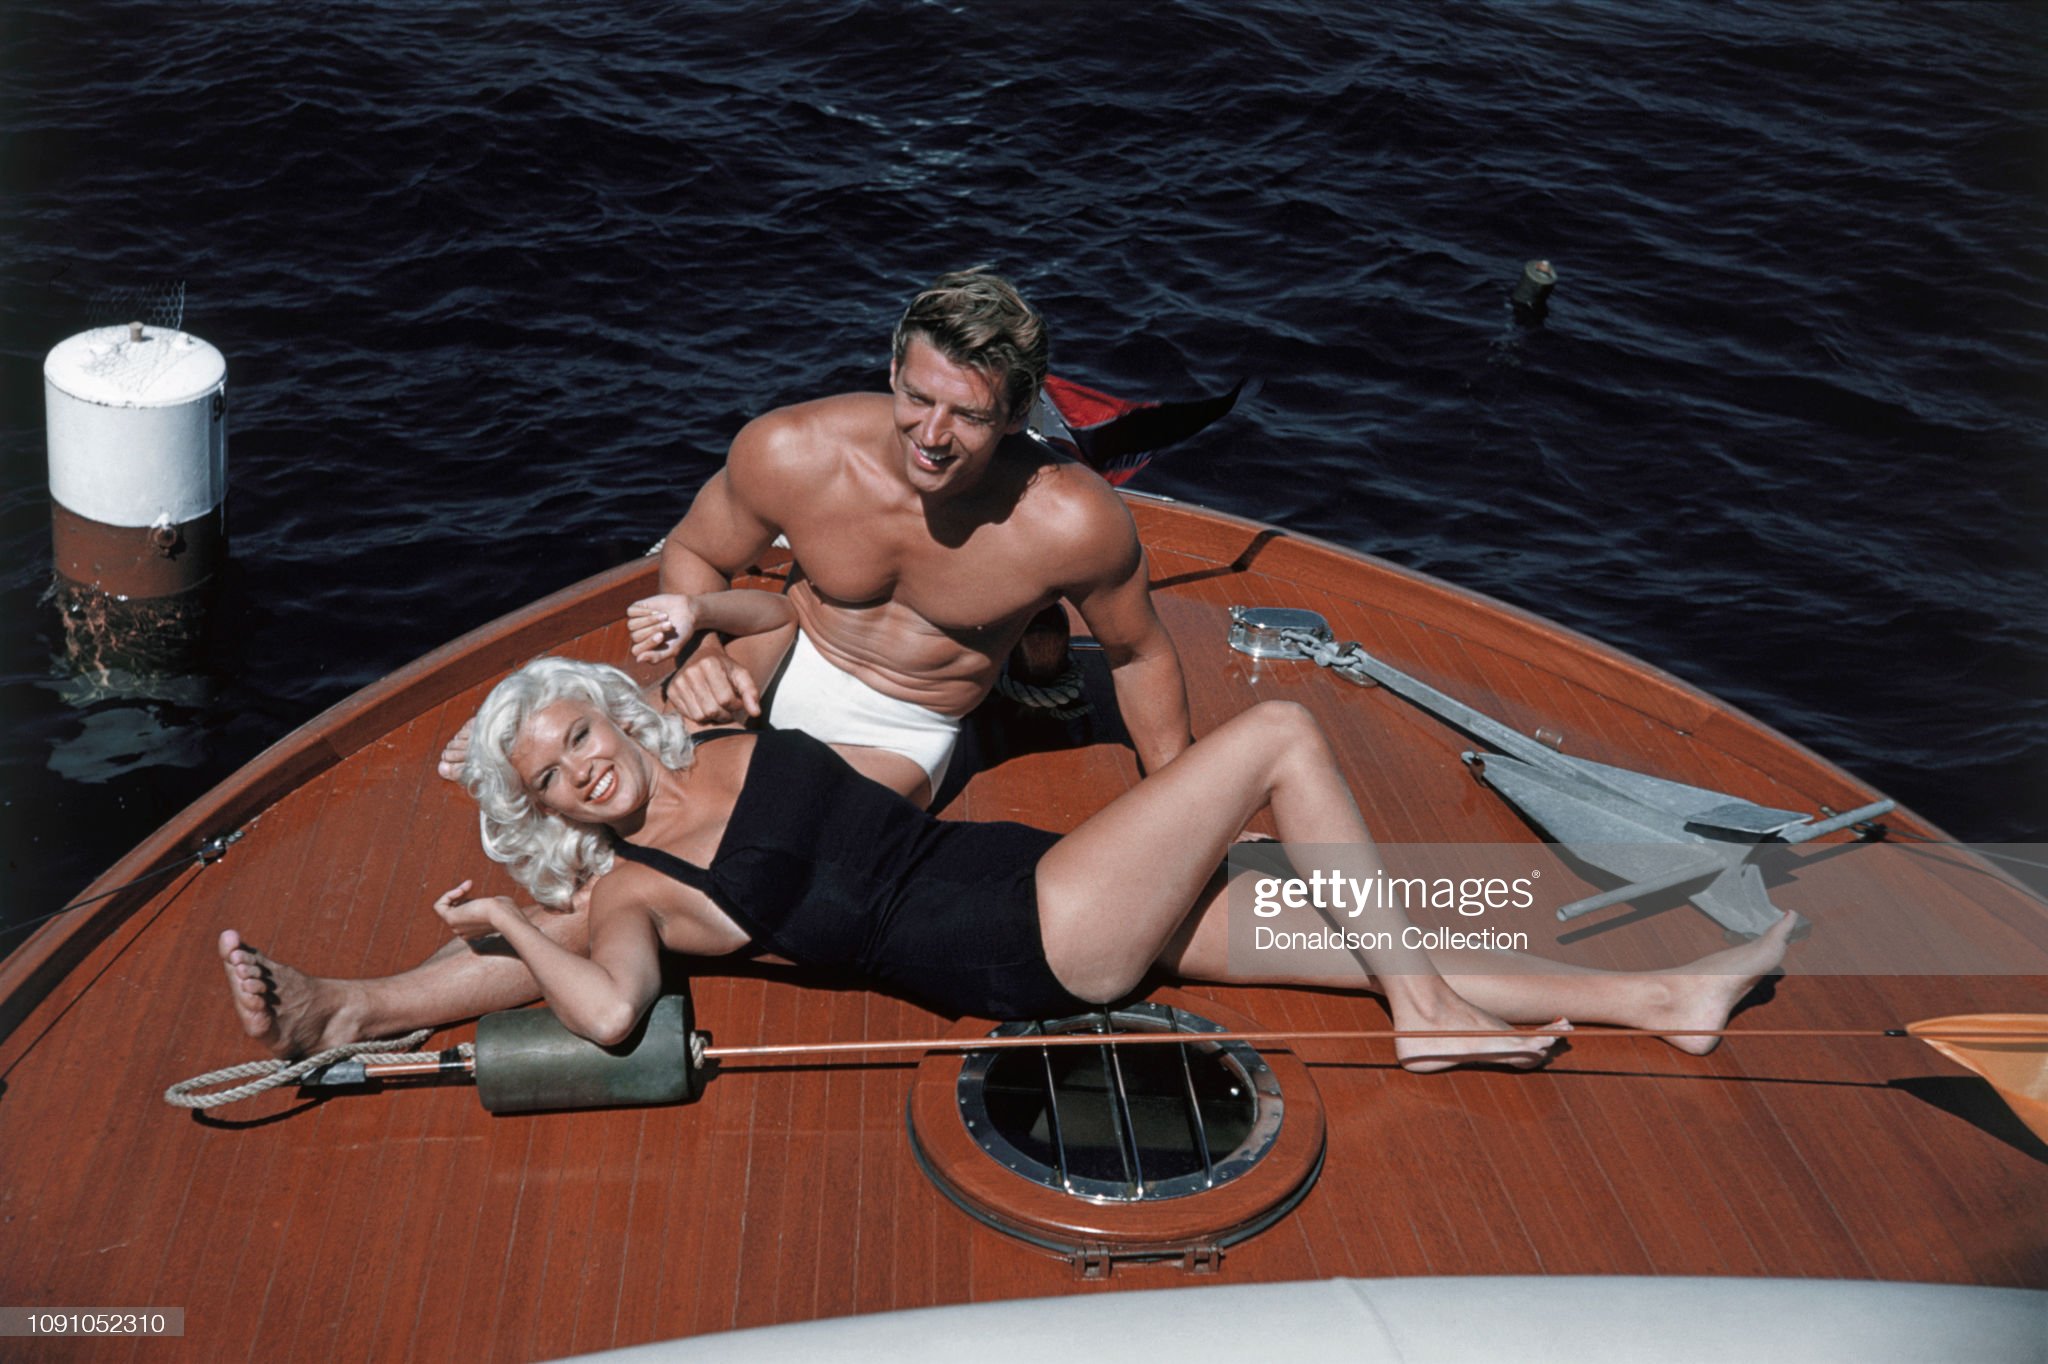 Jayne Mansfield poses for a photo with husband Mickey Hargitay on their way to Catalina on July 22, 1957 between Los Angeles and Catalina, California. 